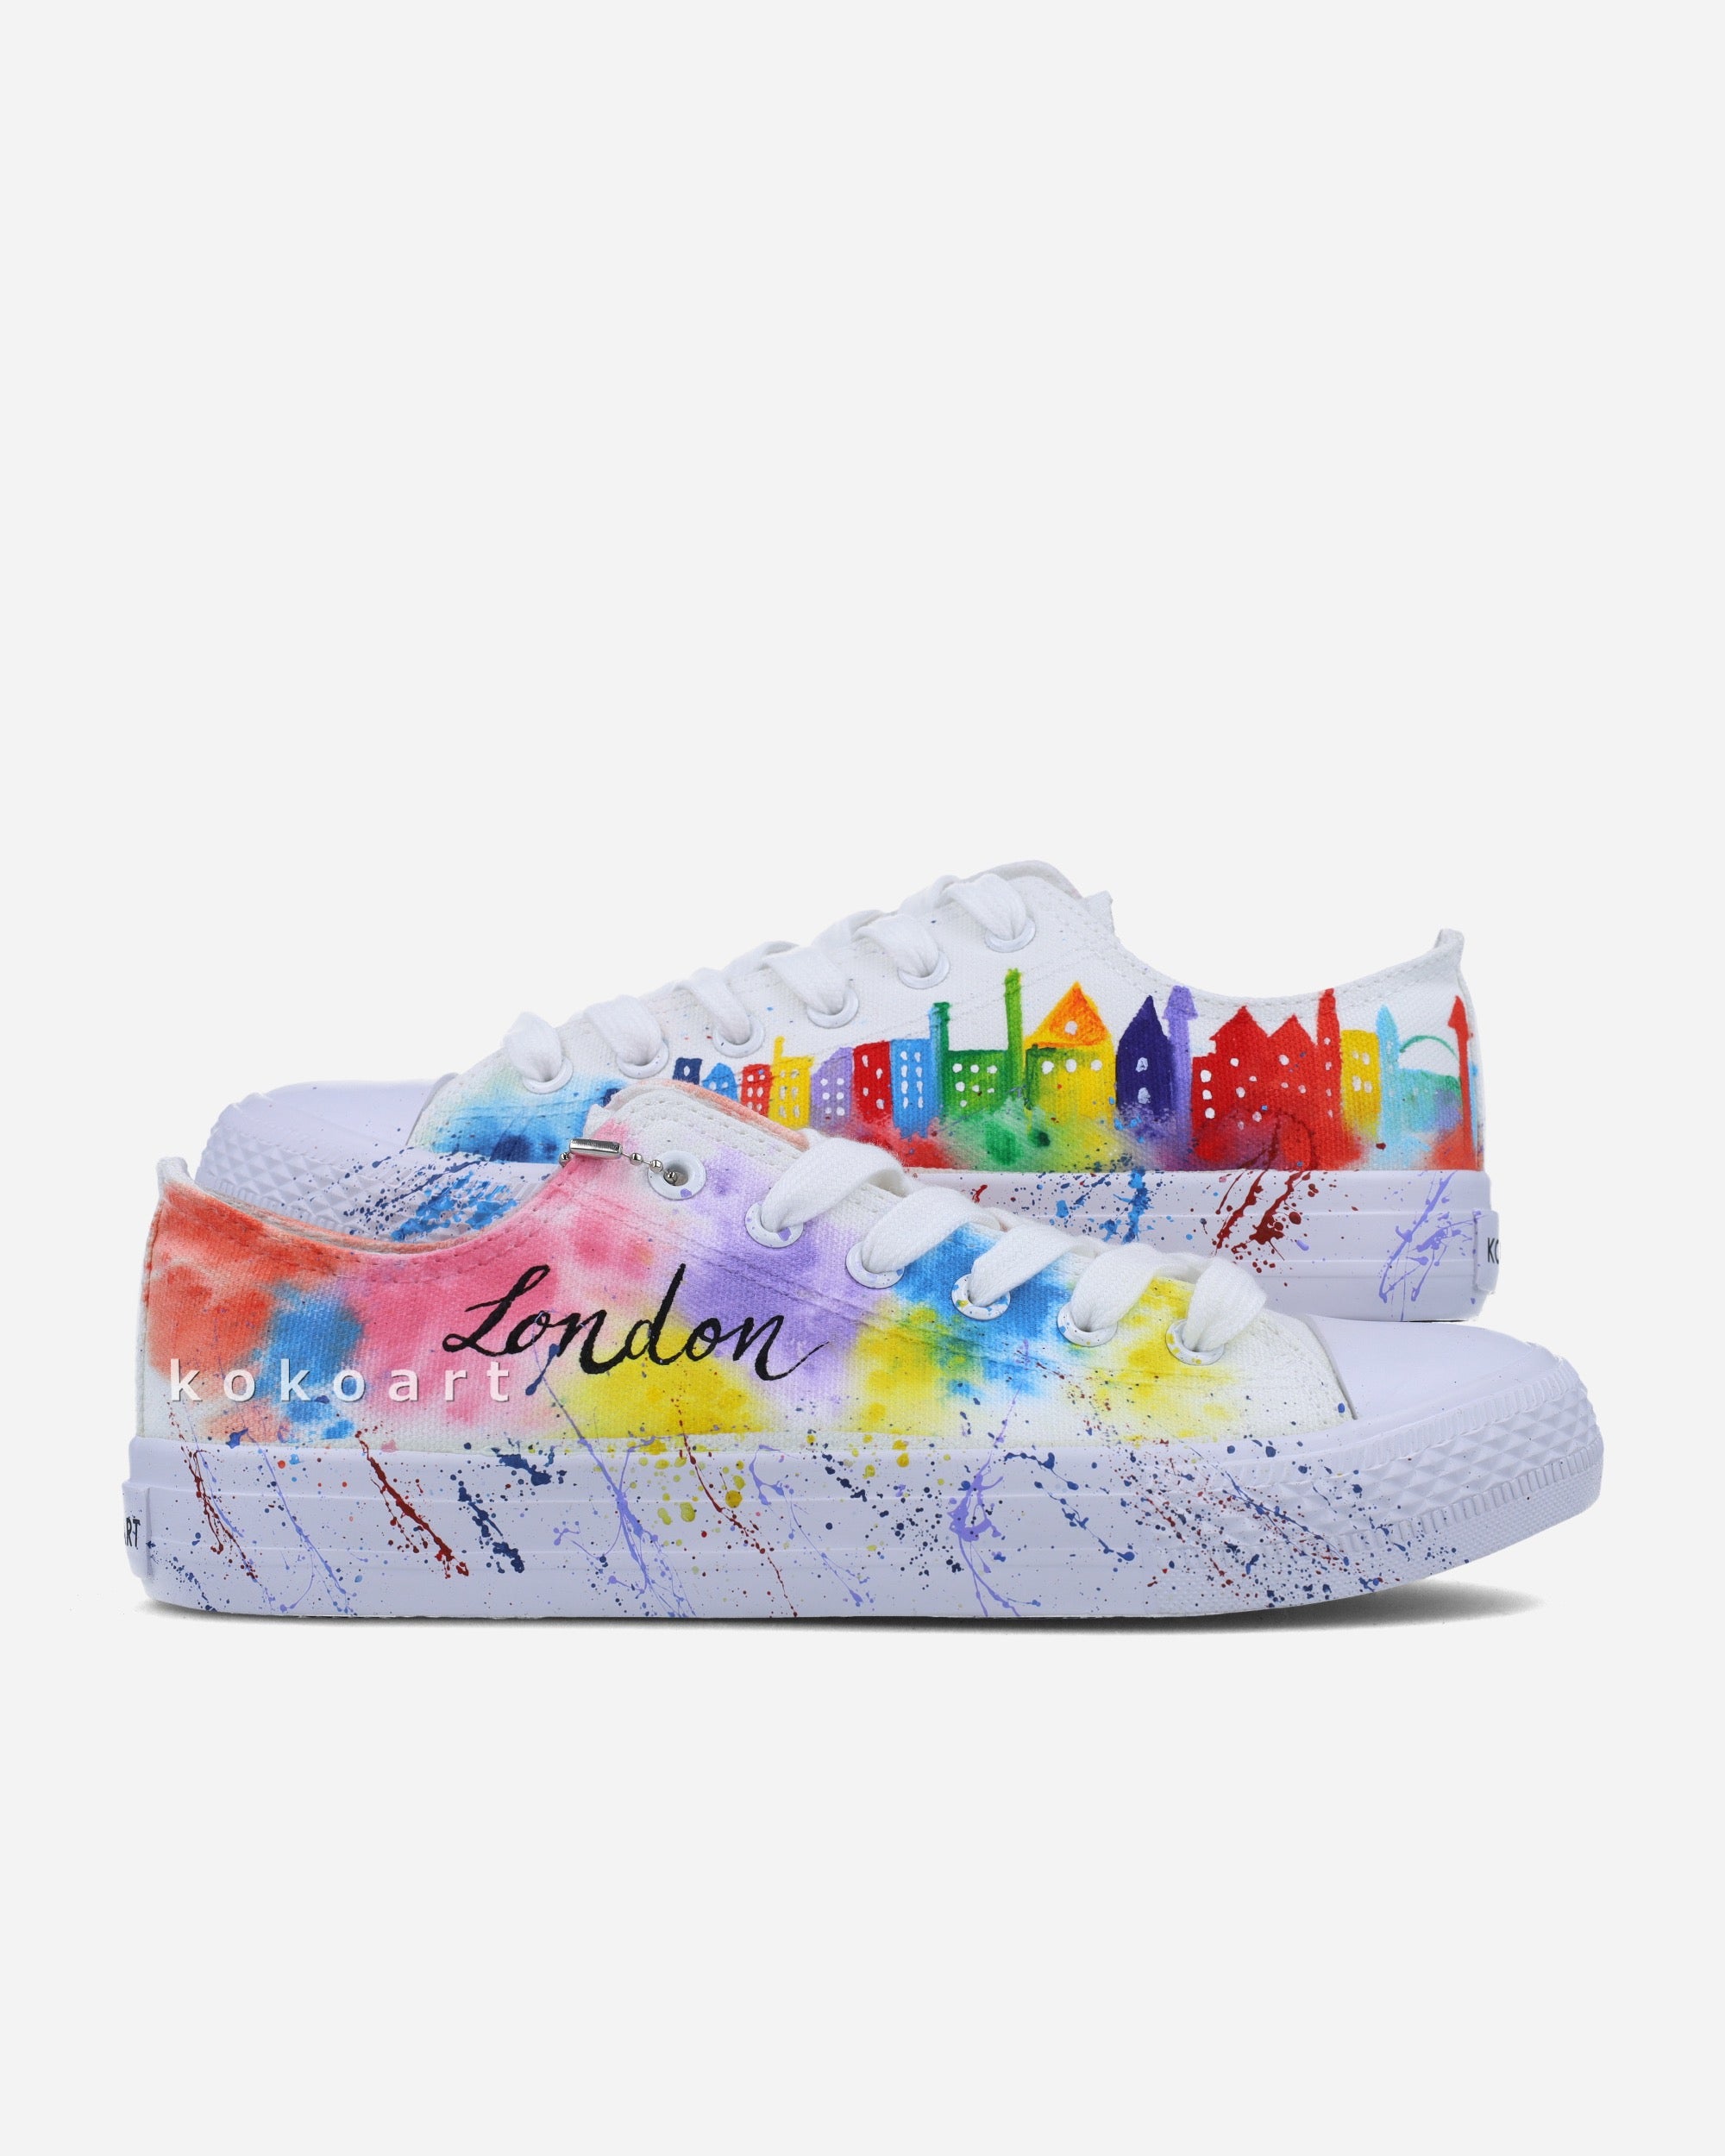 London Skyline Watercolour and Splatters Hand Painted Shoes